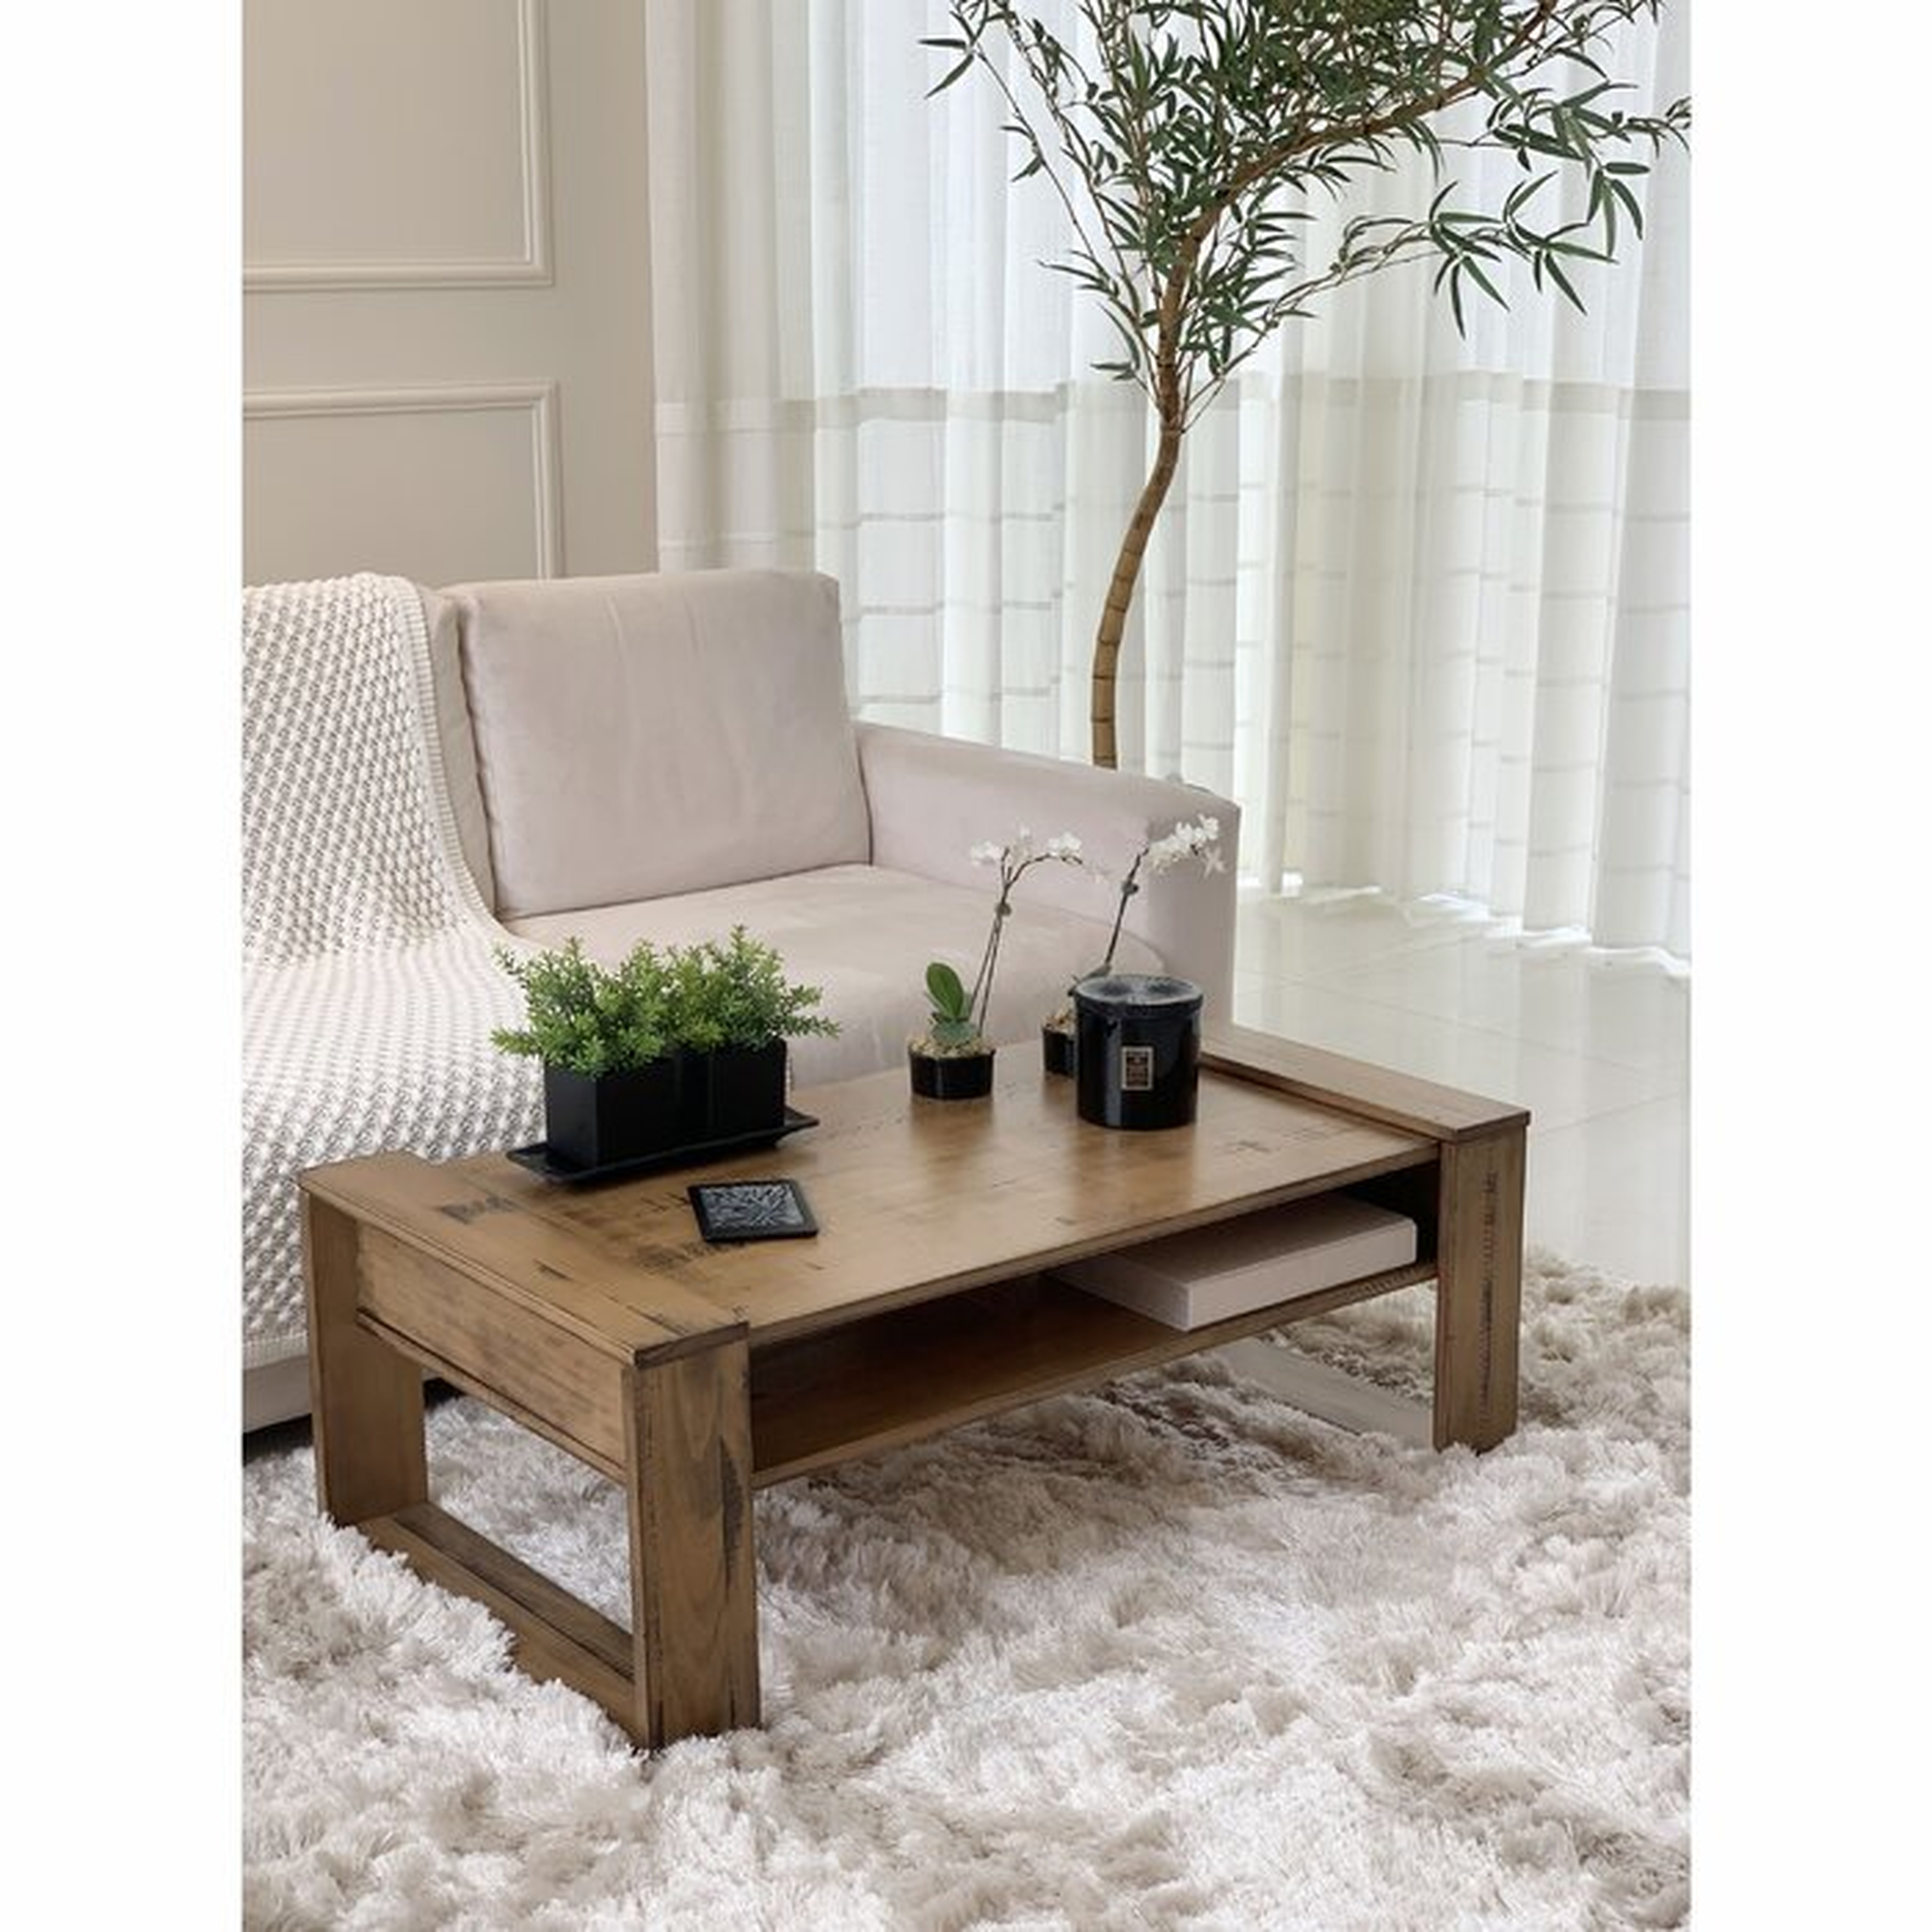 Millport Solid Wood Sled Coffee Table with Storage - Wayfair